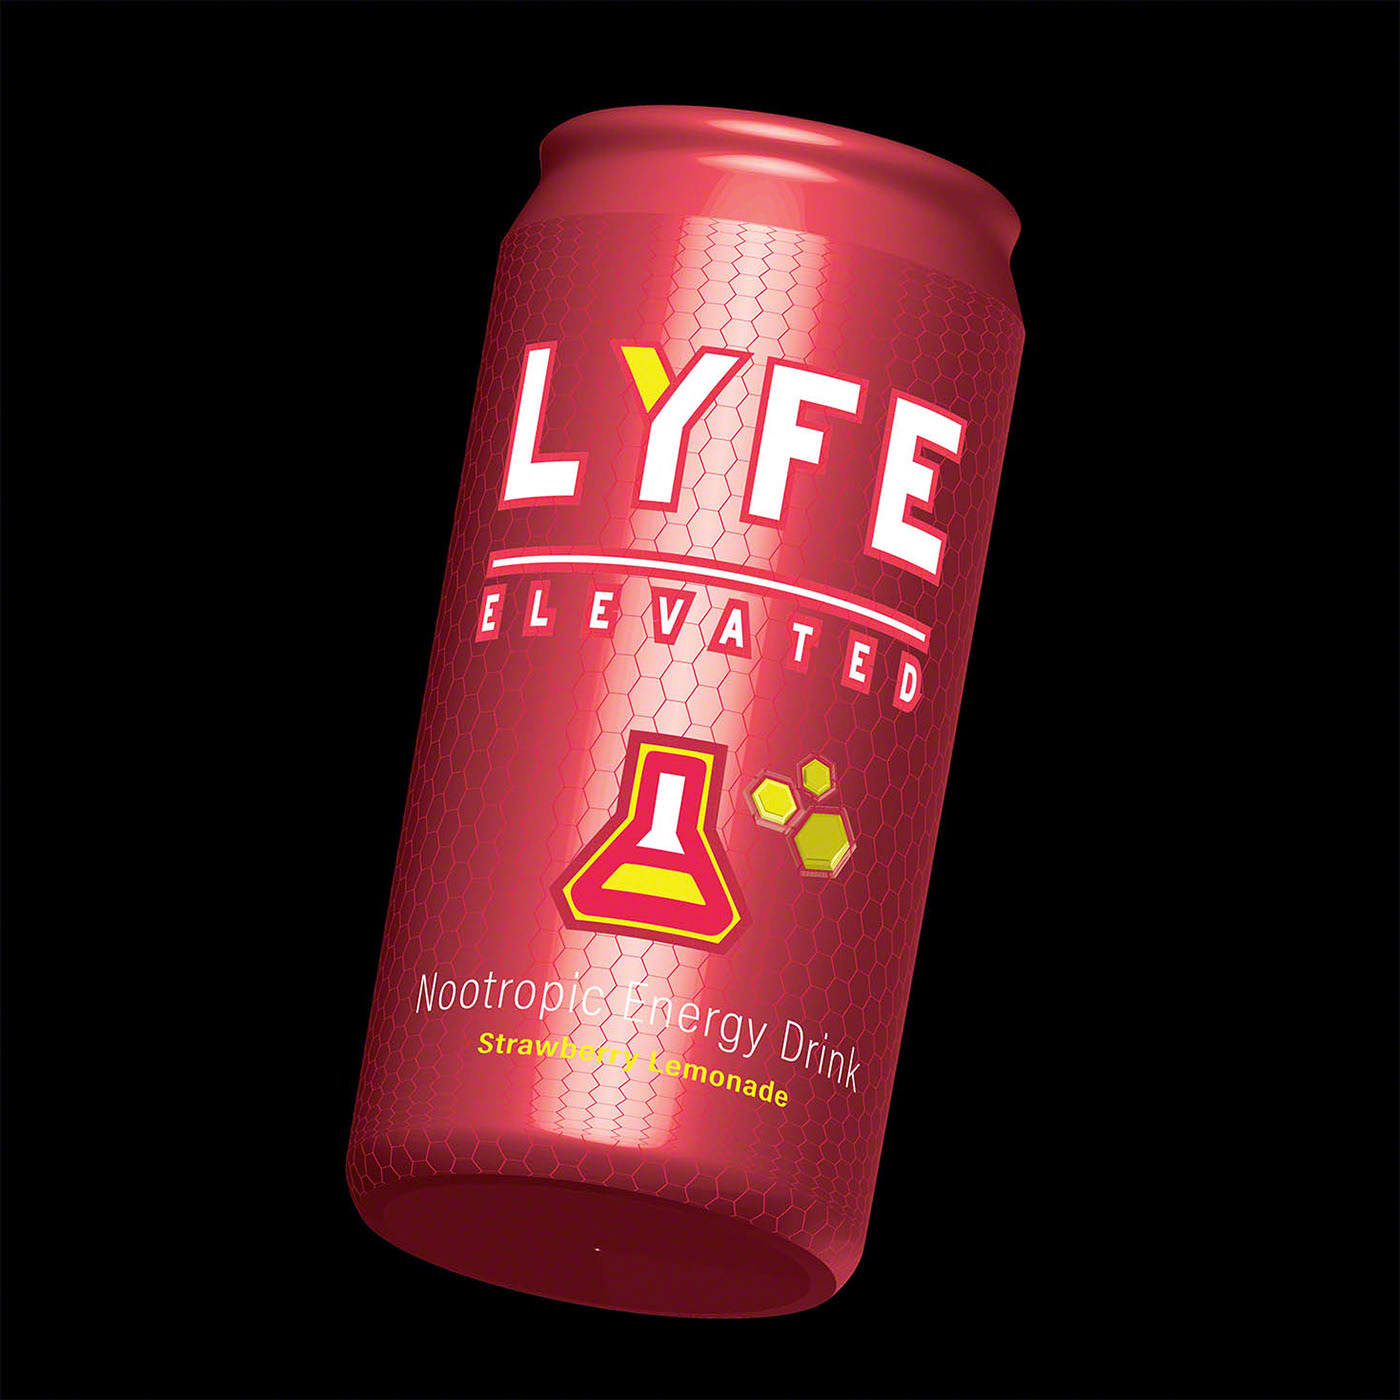 3D product models for Lyfe Elevated RTD Cans